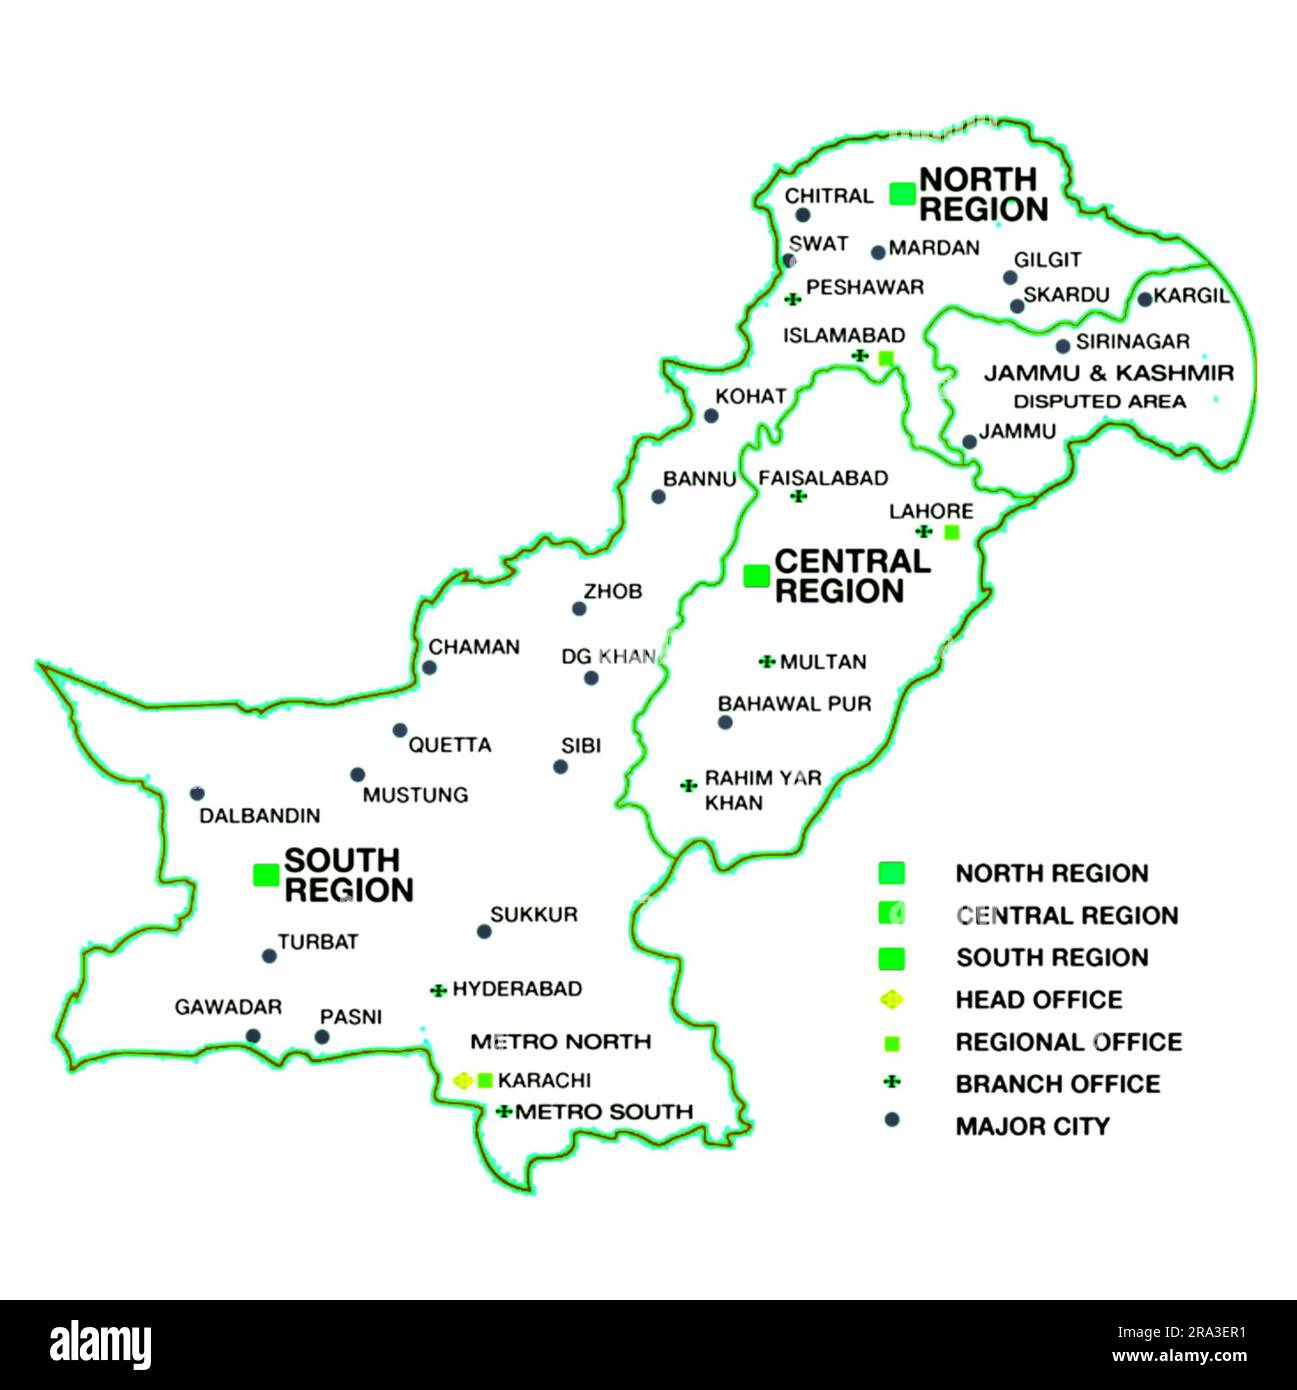 Pakistan map hd download now Stock Photo